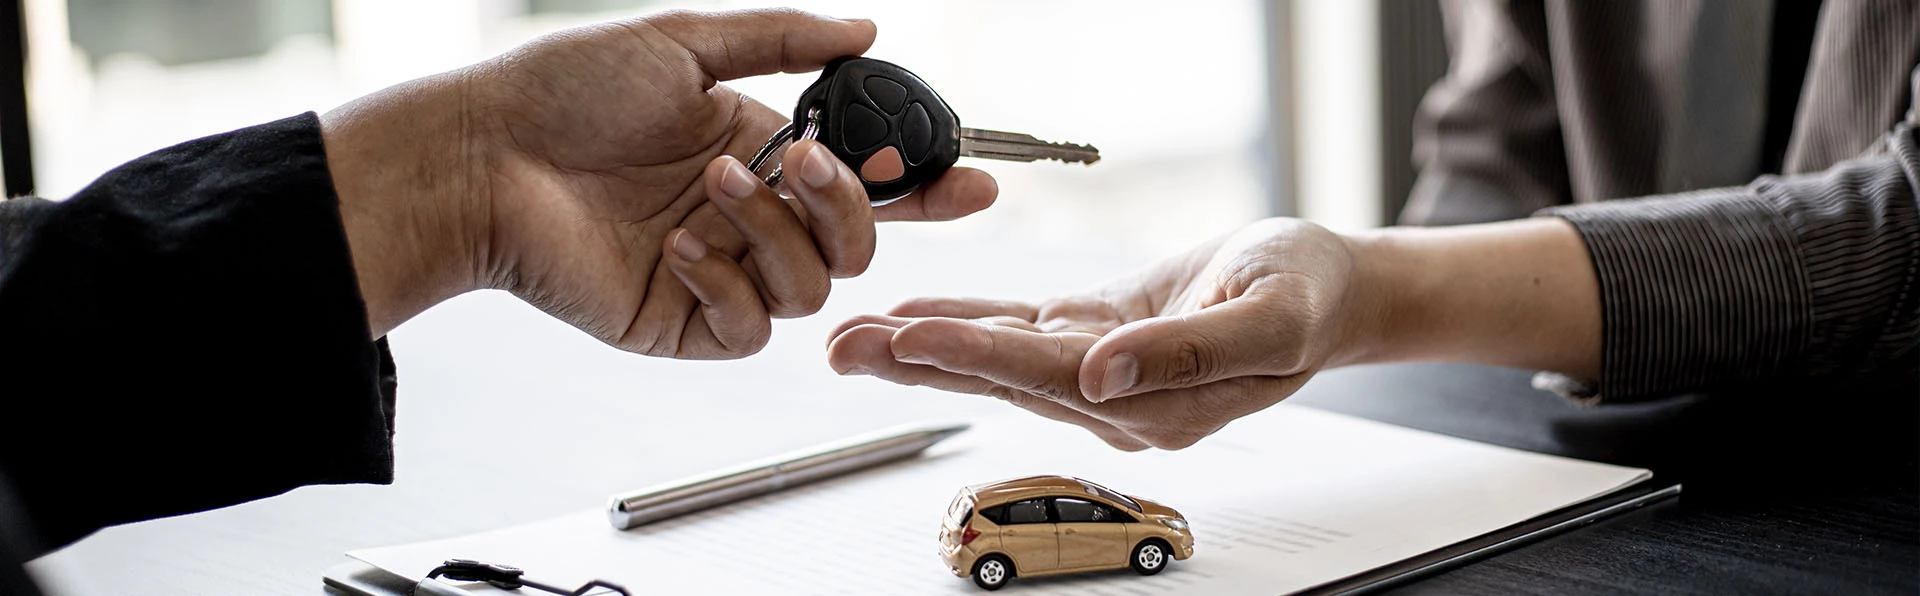 4 Facts that will Convince You to Try Vehicle Leasing